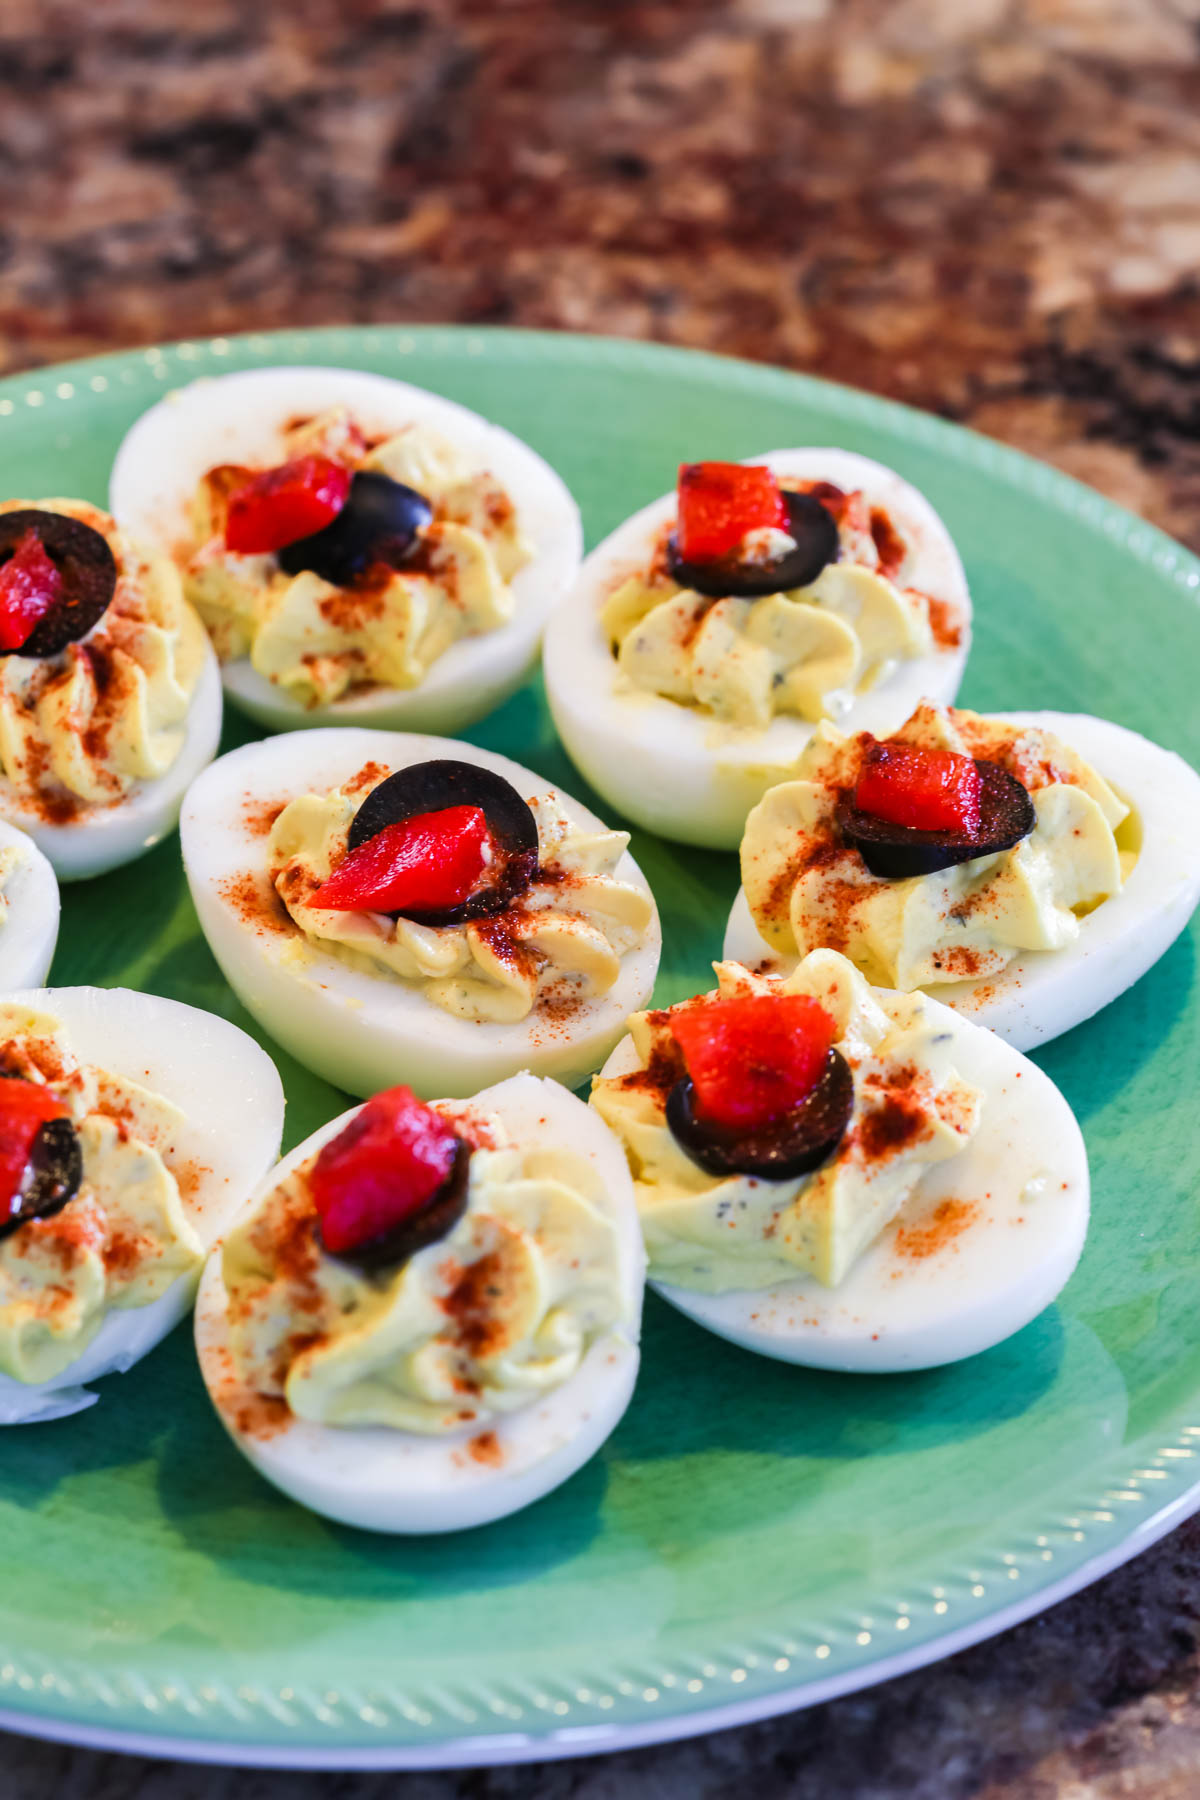 Deviled Eggs without Mayo topped with olives.